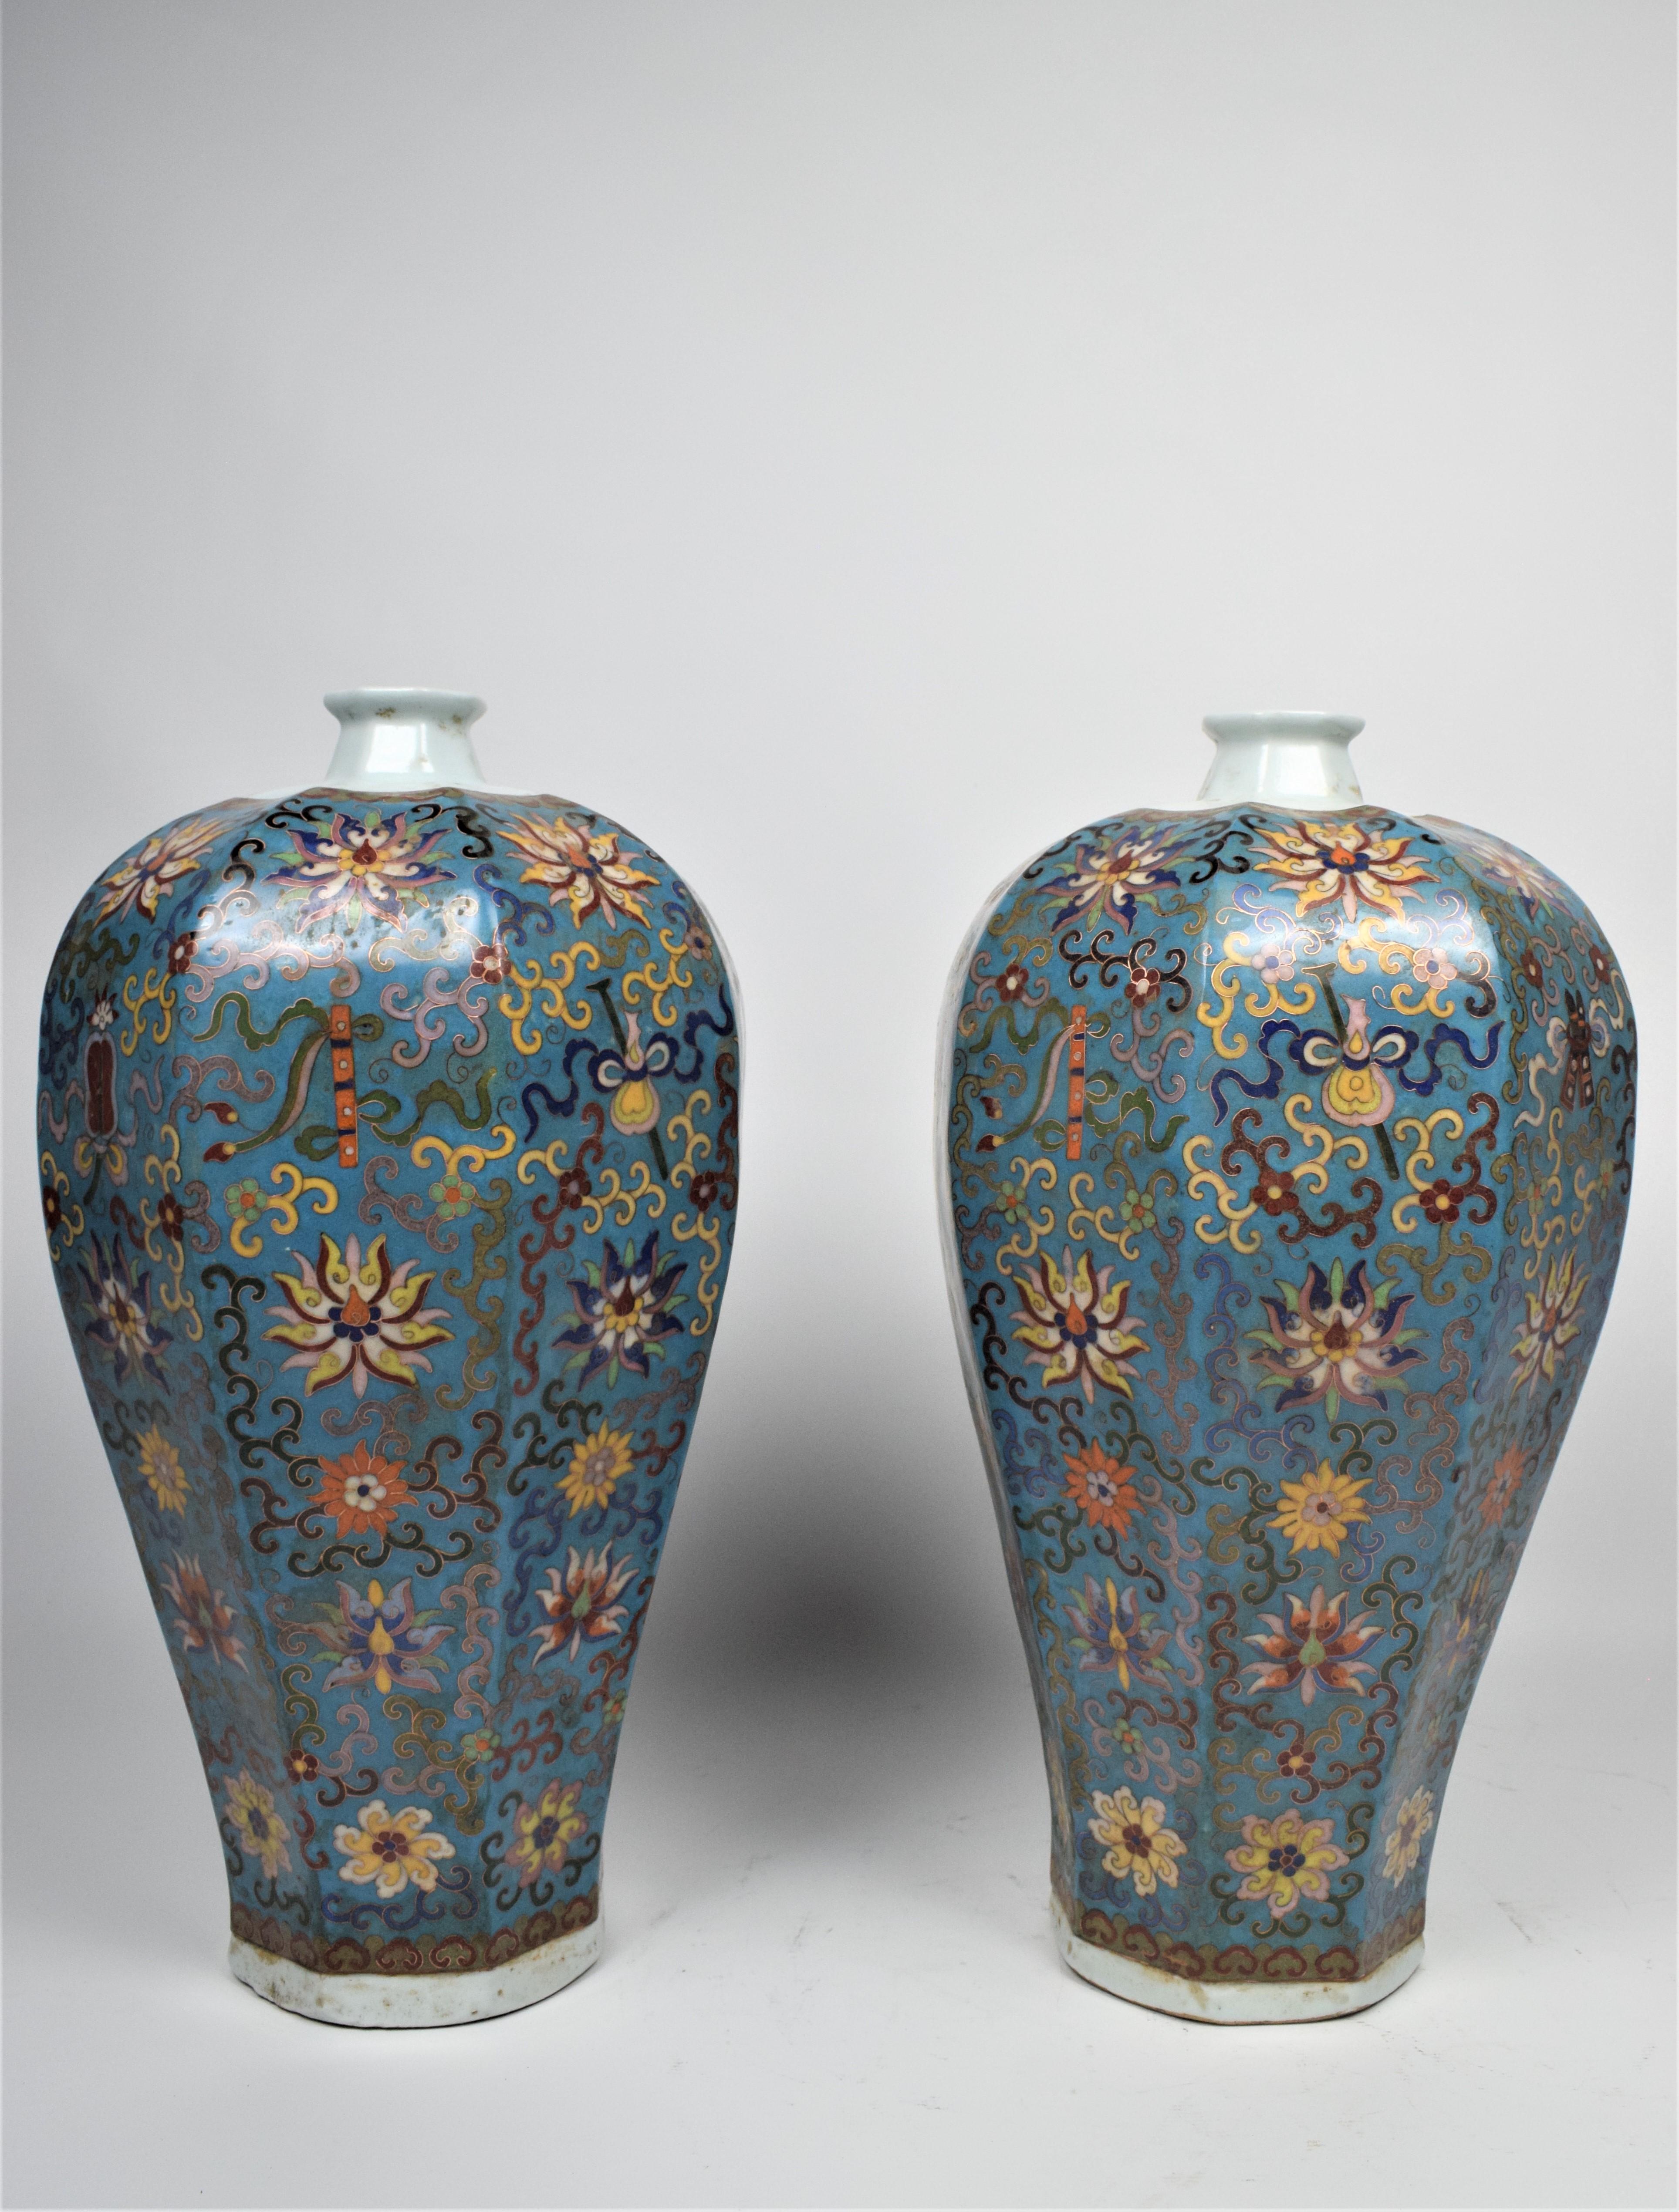 A pair of large Cloisonné Enamel bottle vases late Qing Dynasty, 19th century

These exquisite pair of Cloisonné Enamel bottle vases feature a stunning and intricate floral design rendered in the ancient art form of cloisonné enamel. Cloisonné is a